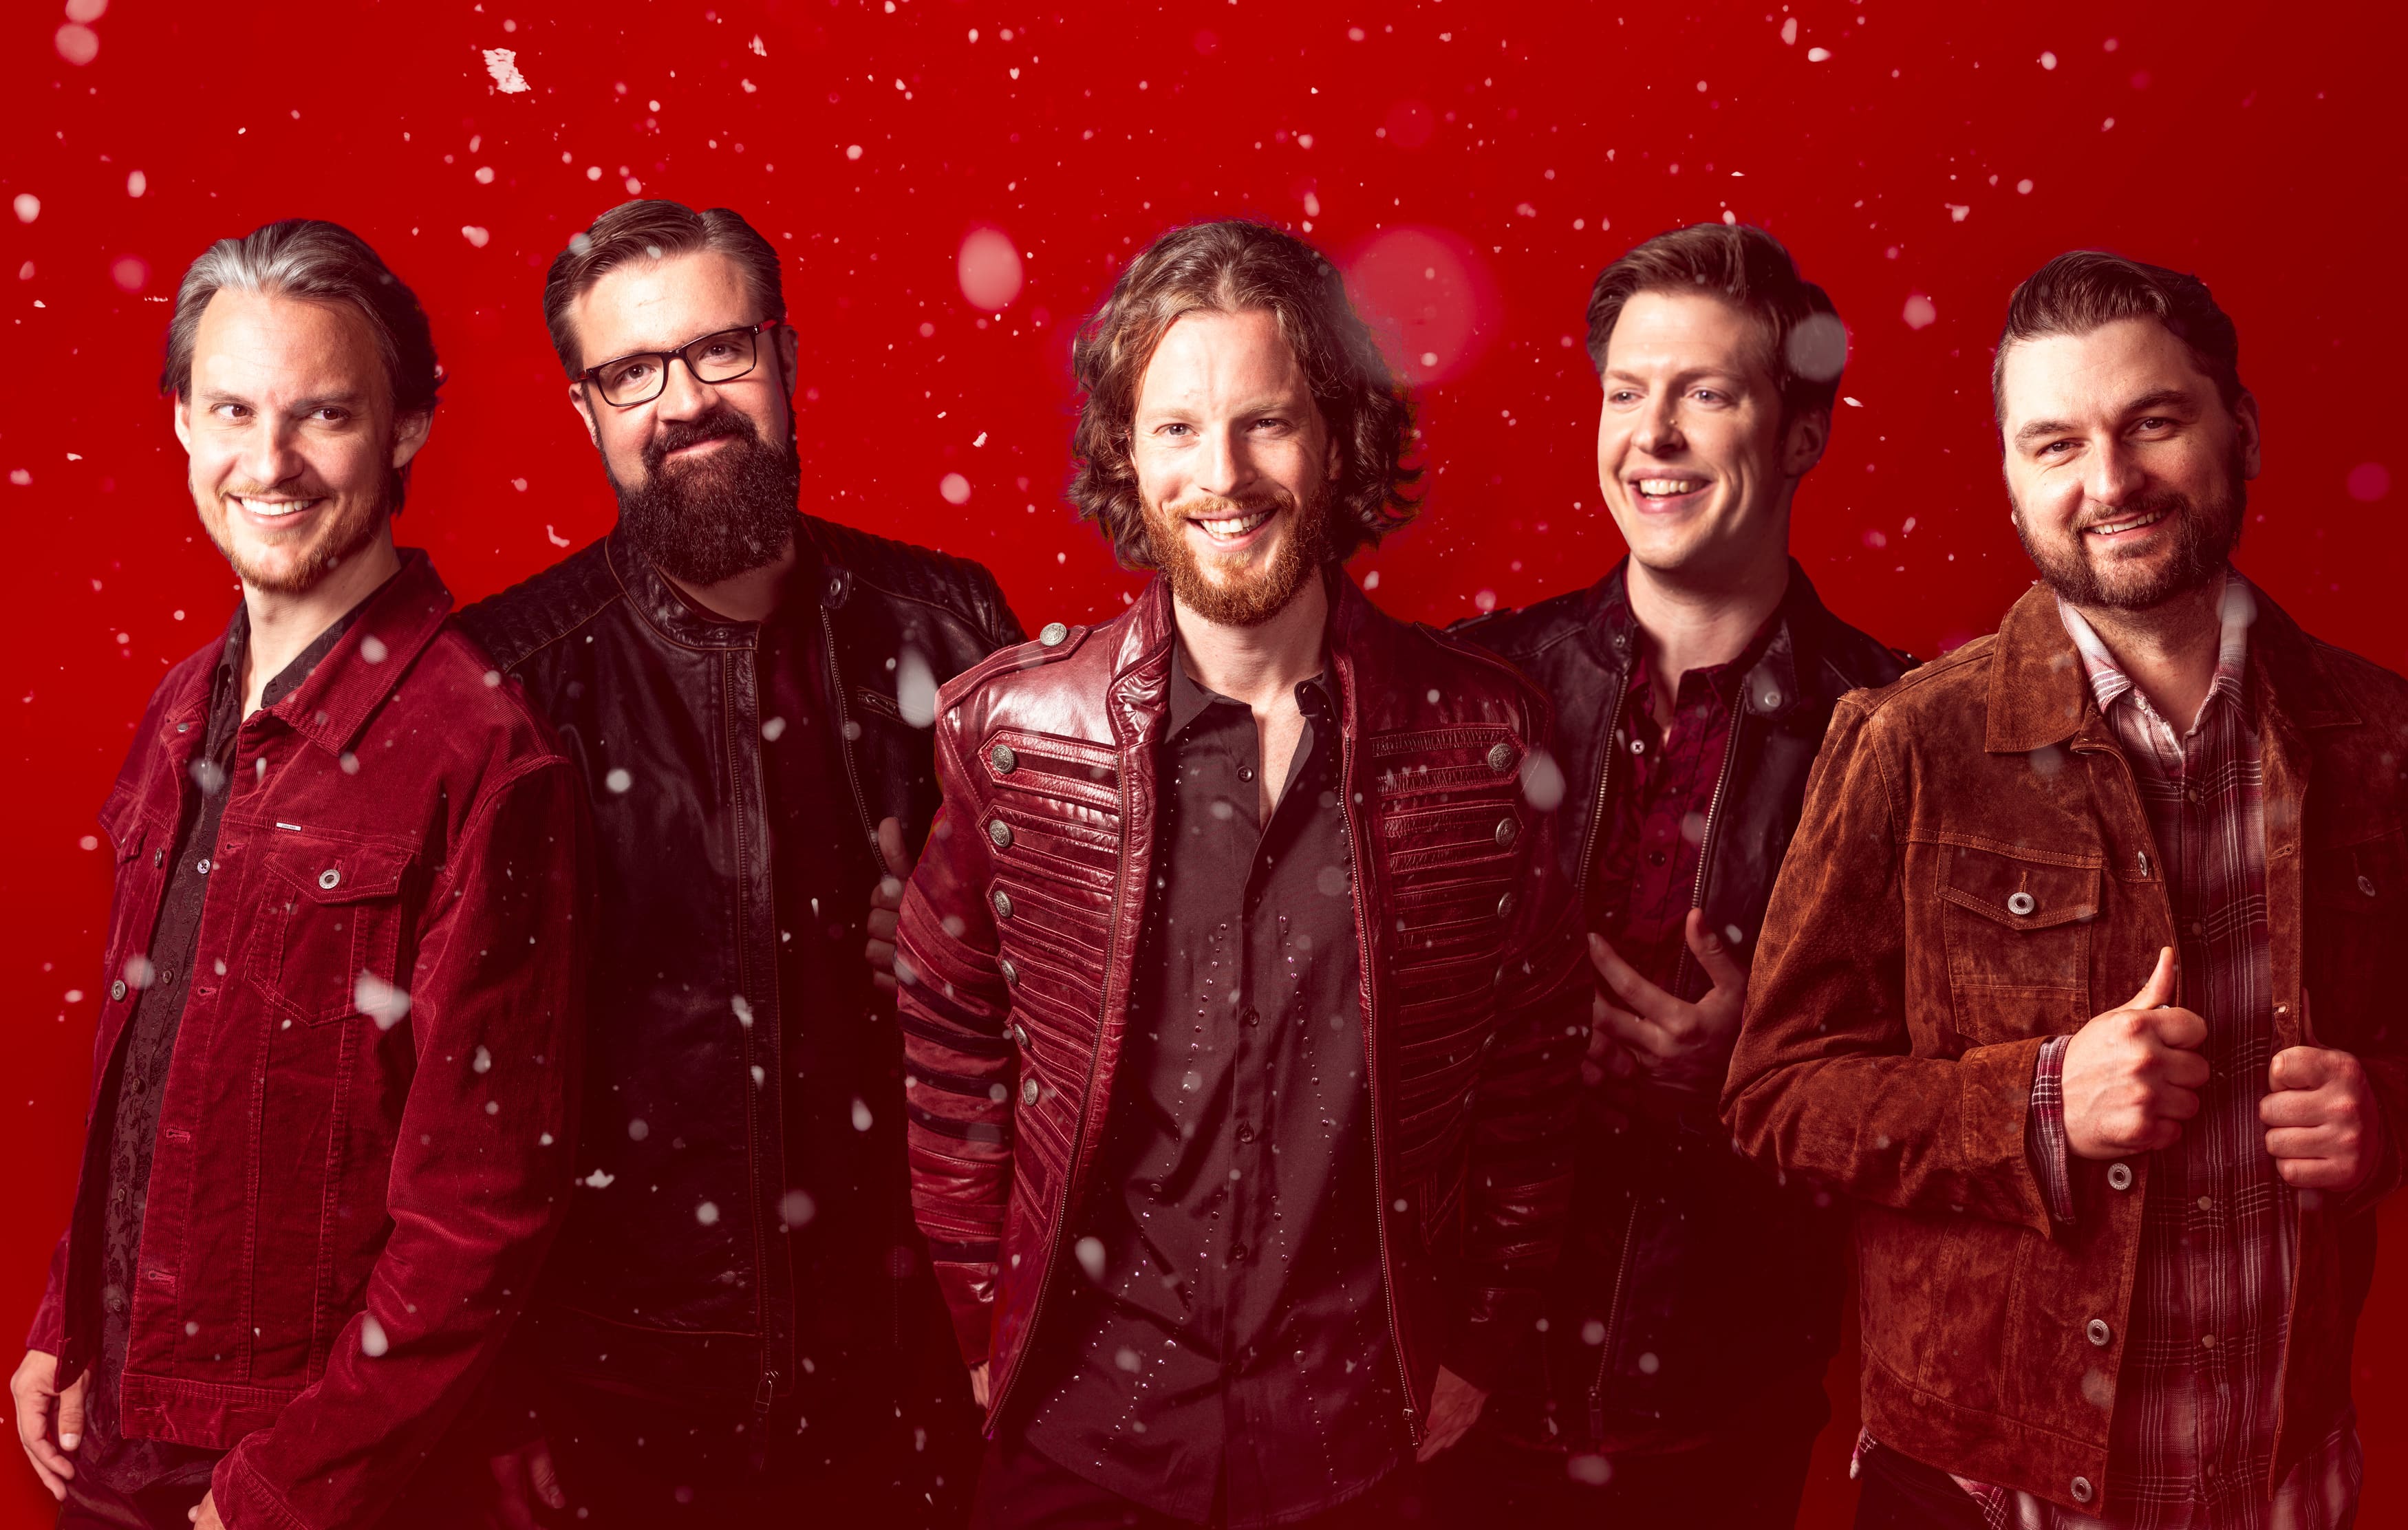 Home Free Deliver Holiday Cheer, Reminisce on Christmases Past on ‘Warmest Winter’